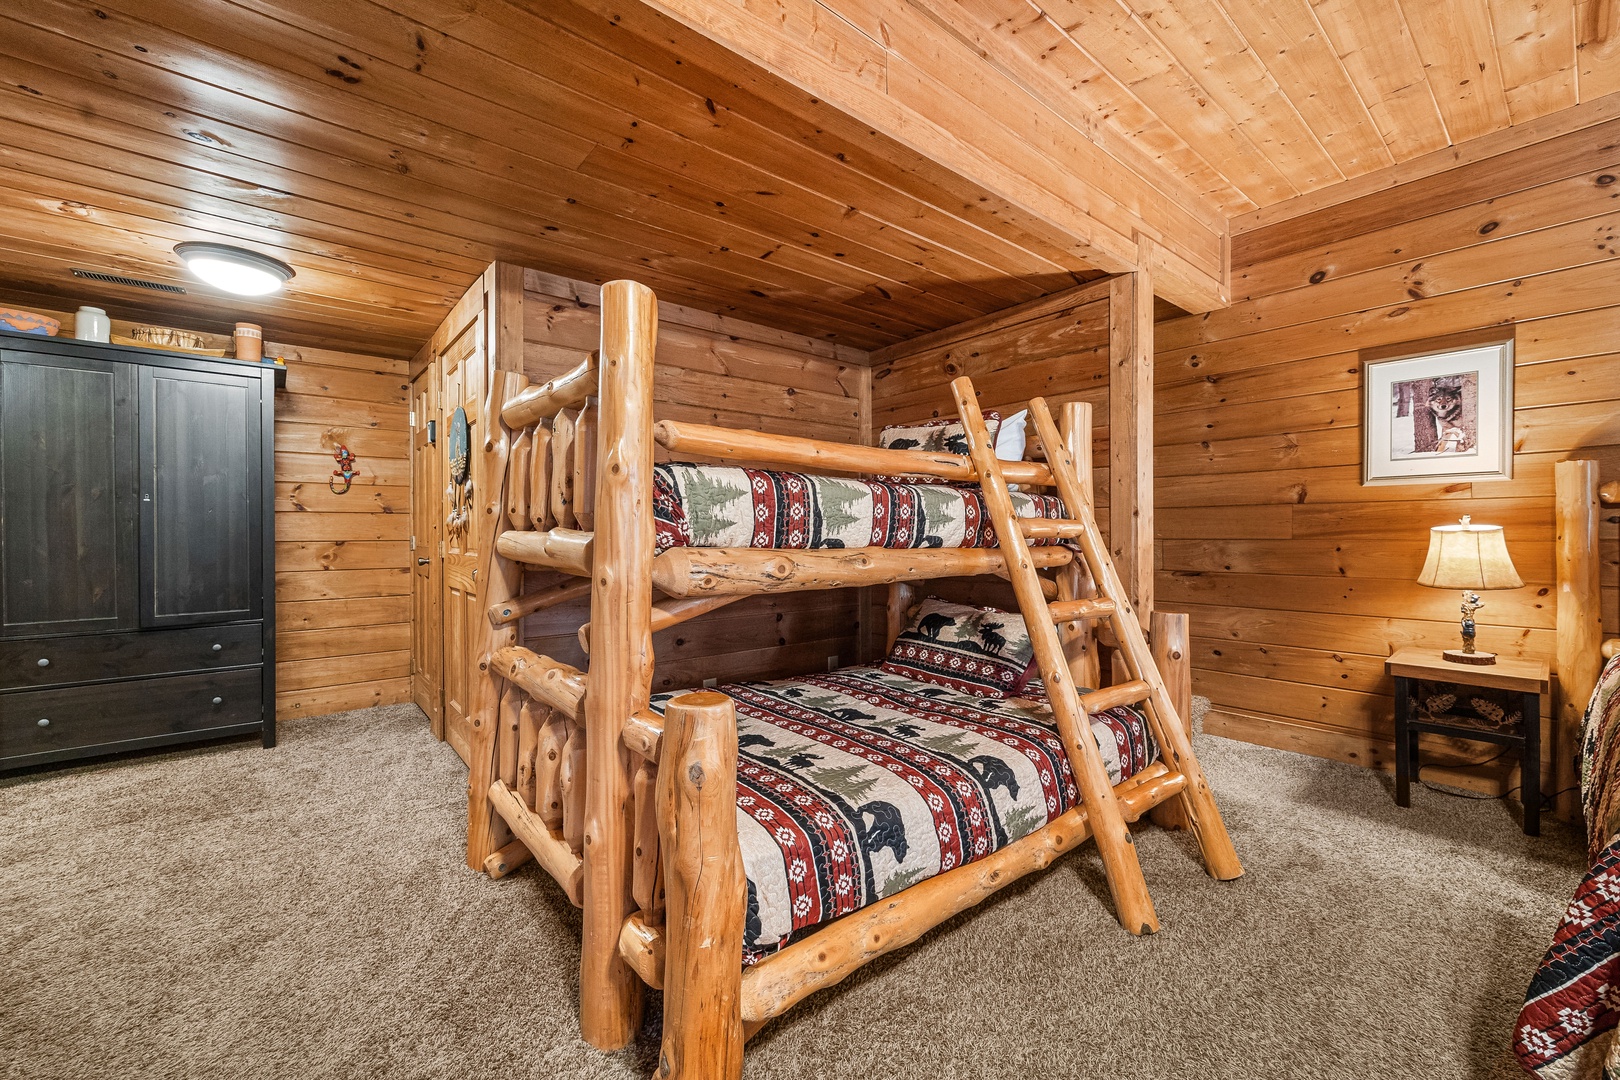 Bedroom with Bunkbeds at A Beary Nice Cabin, a 2 bedroom cabin rental located in Pigeon Forge